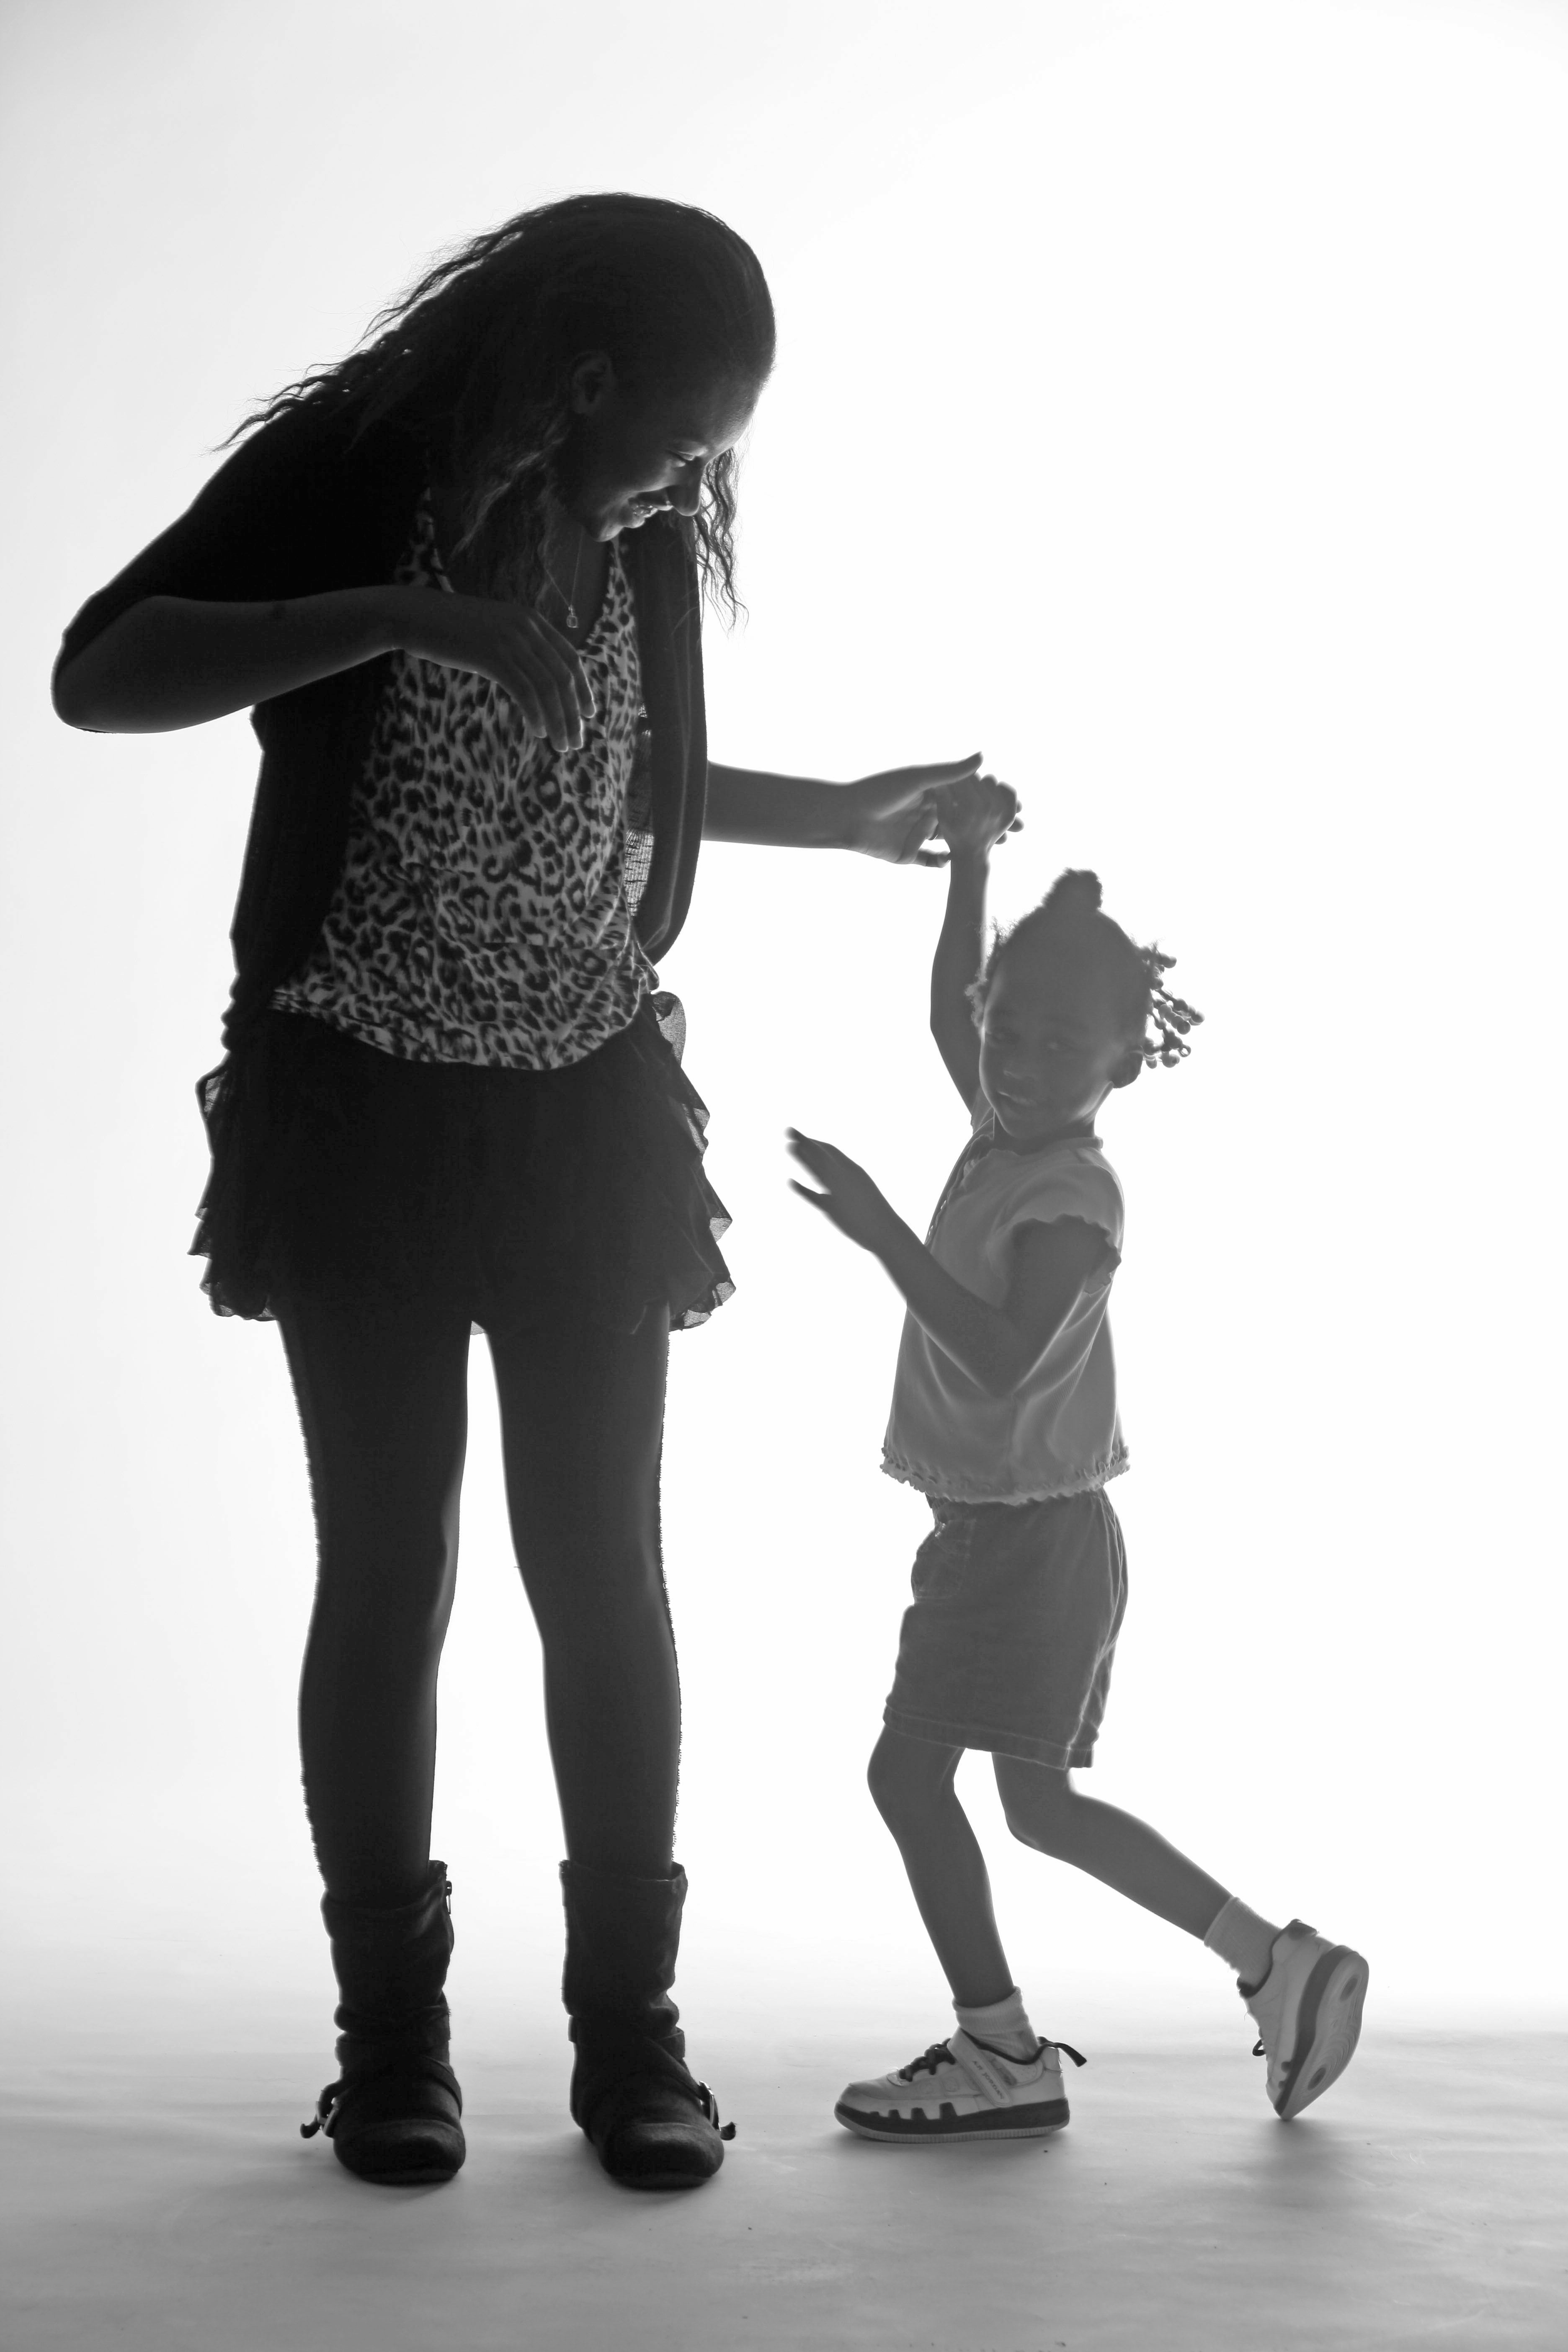 SAFE: Mother with Daughter Dancing